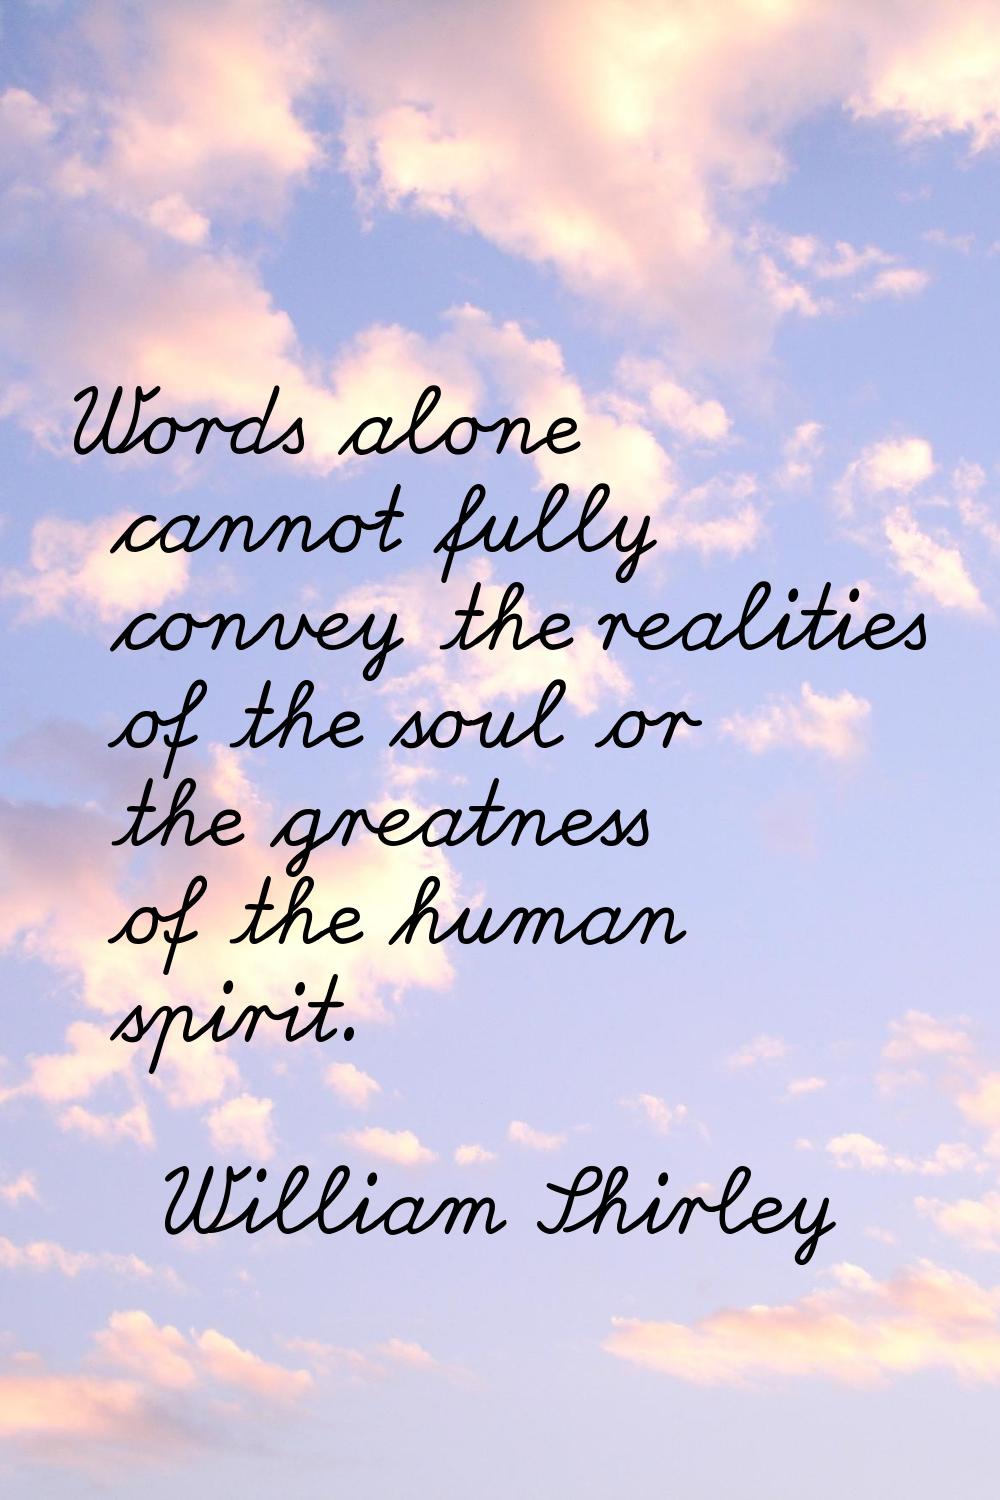 Words alone cannot fully convey the realities of the soul or the greatness of the human spirit.